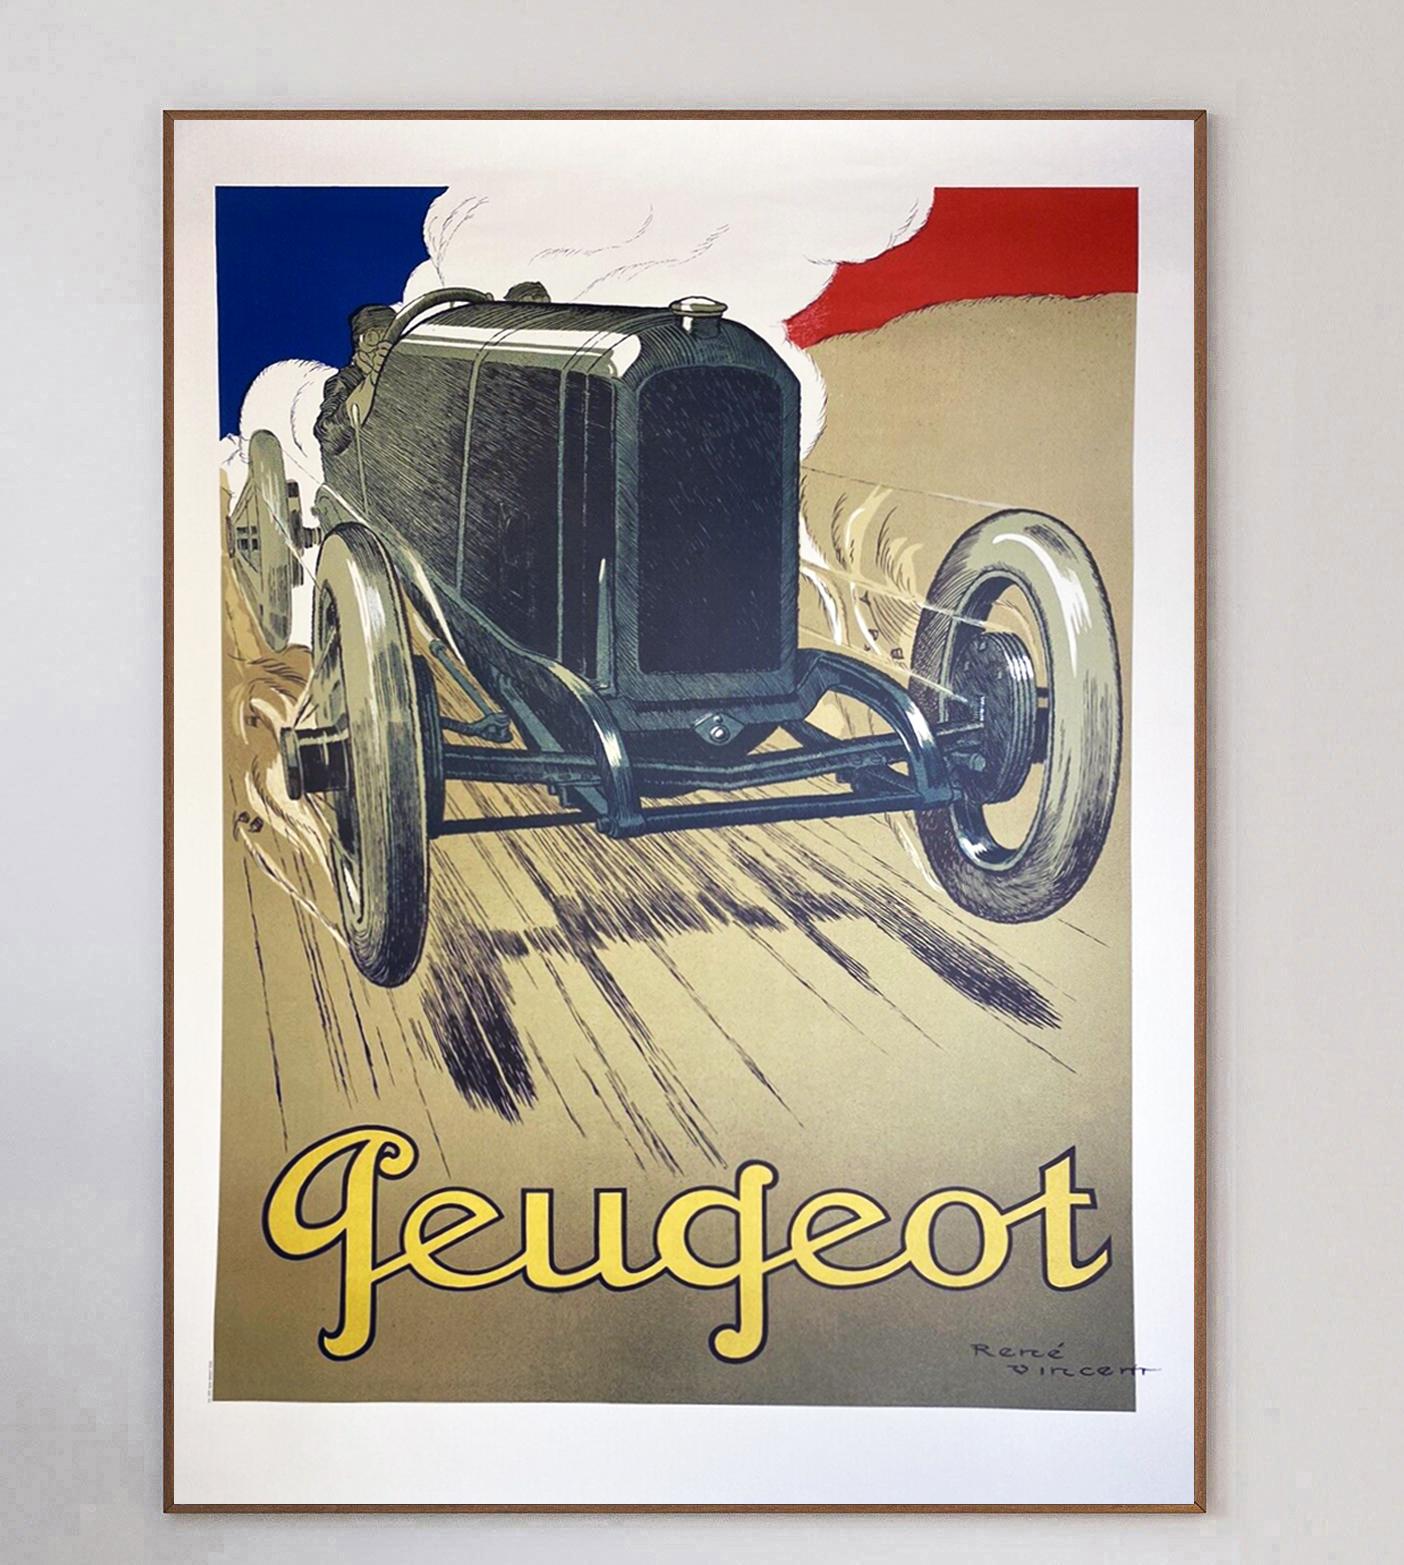 Beautiful lithograph poster originally designed in 1919. Designed by the great poster artist Rene Vincent, this poster promotes Peugeot cars and depicts an early 20th century model speeding down a road. The smoke from the car acts as the white in